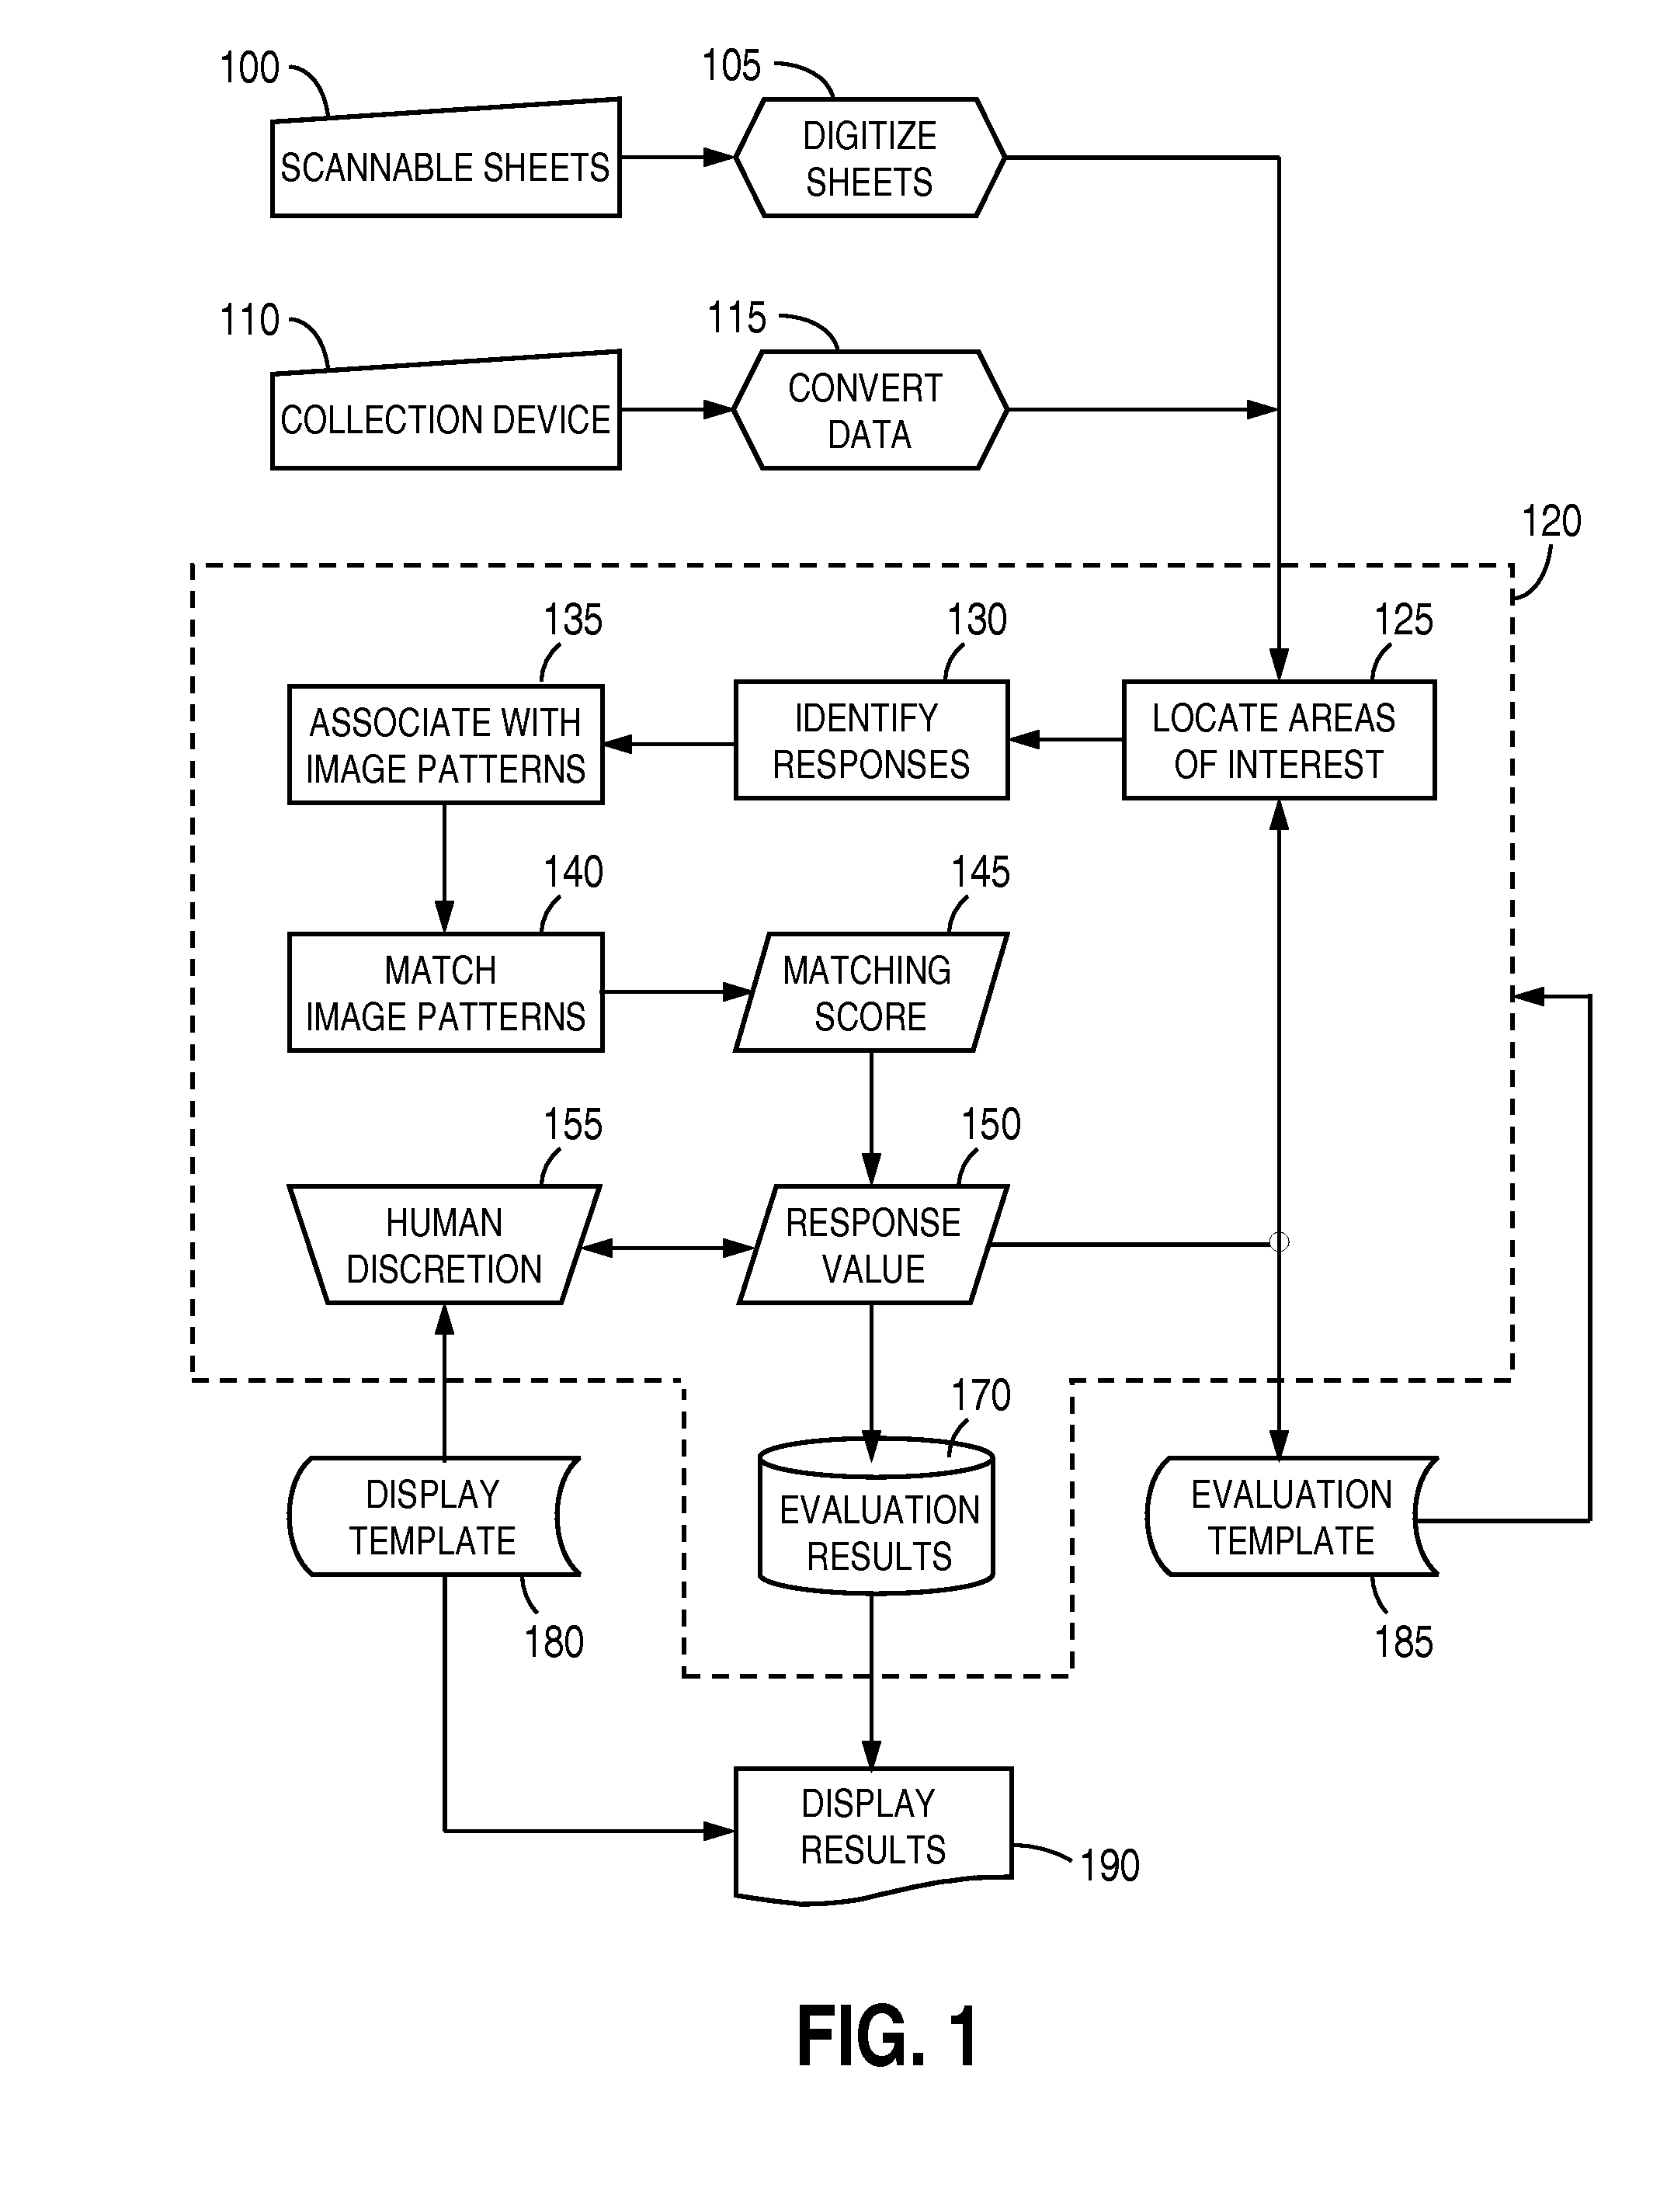 Computerized processing of pictorial responses in evaluations